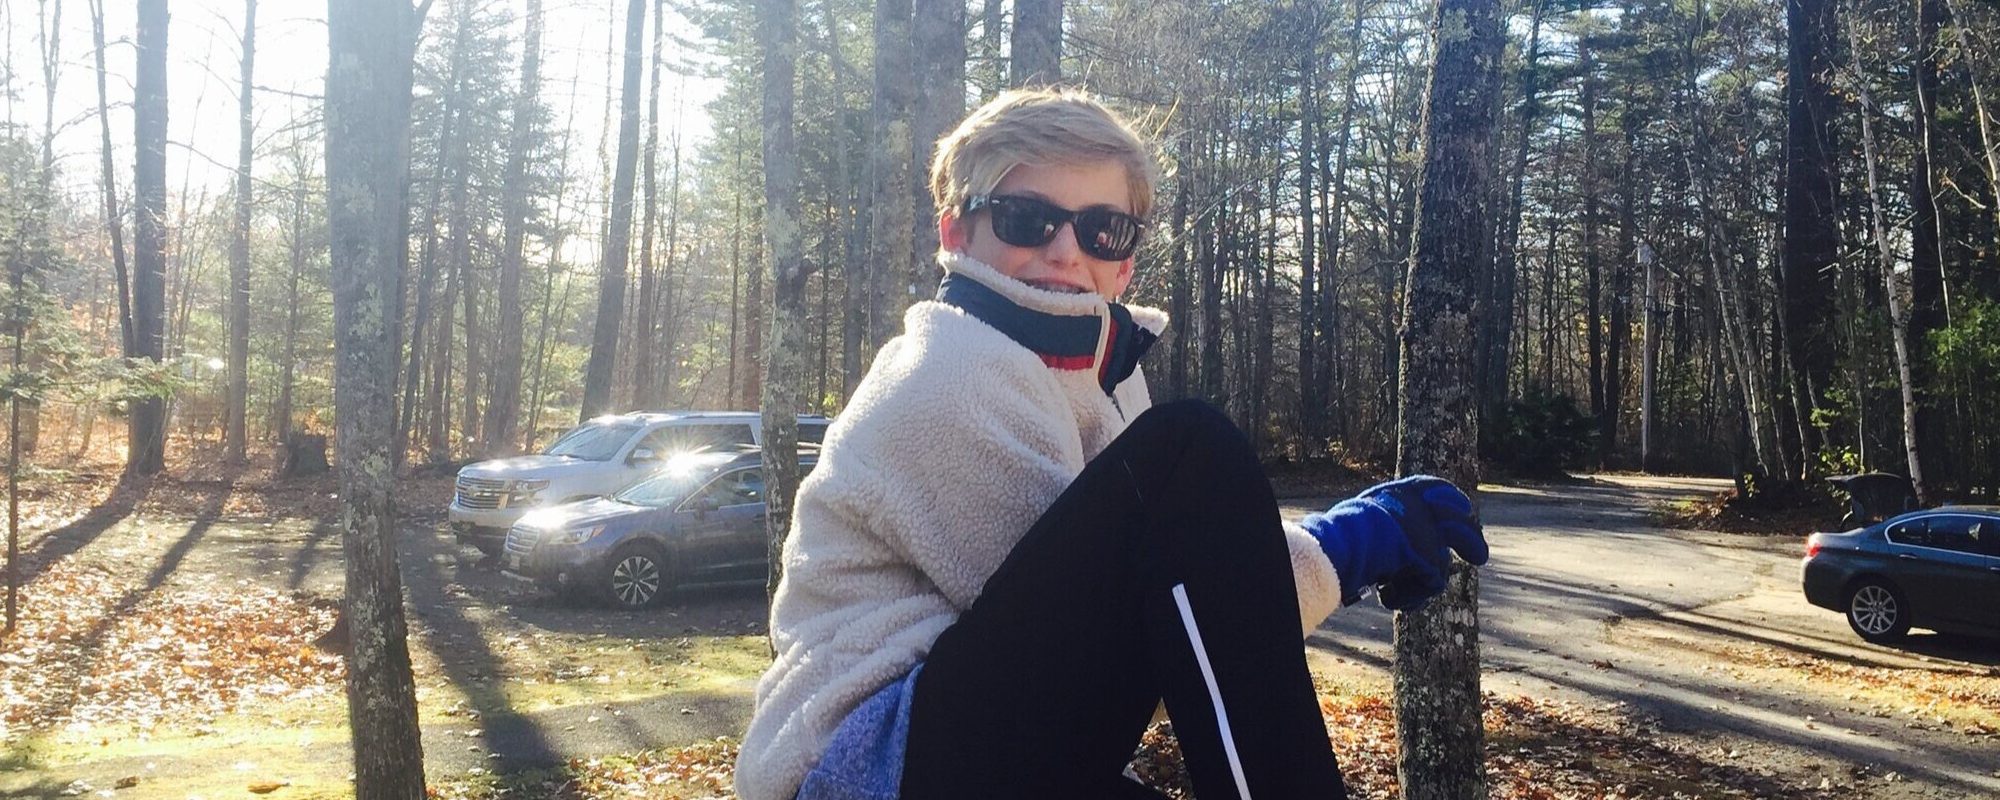 young-boy-wears-sunglasses-smiles-at-camera-on-cold-sunny-day-wooded-background